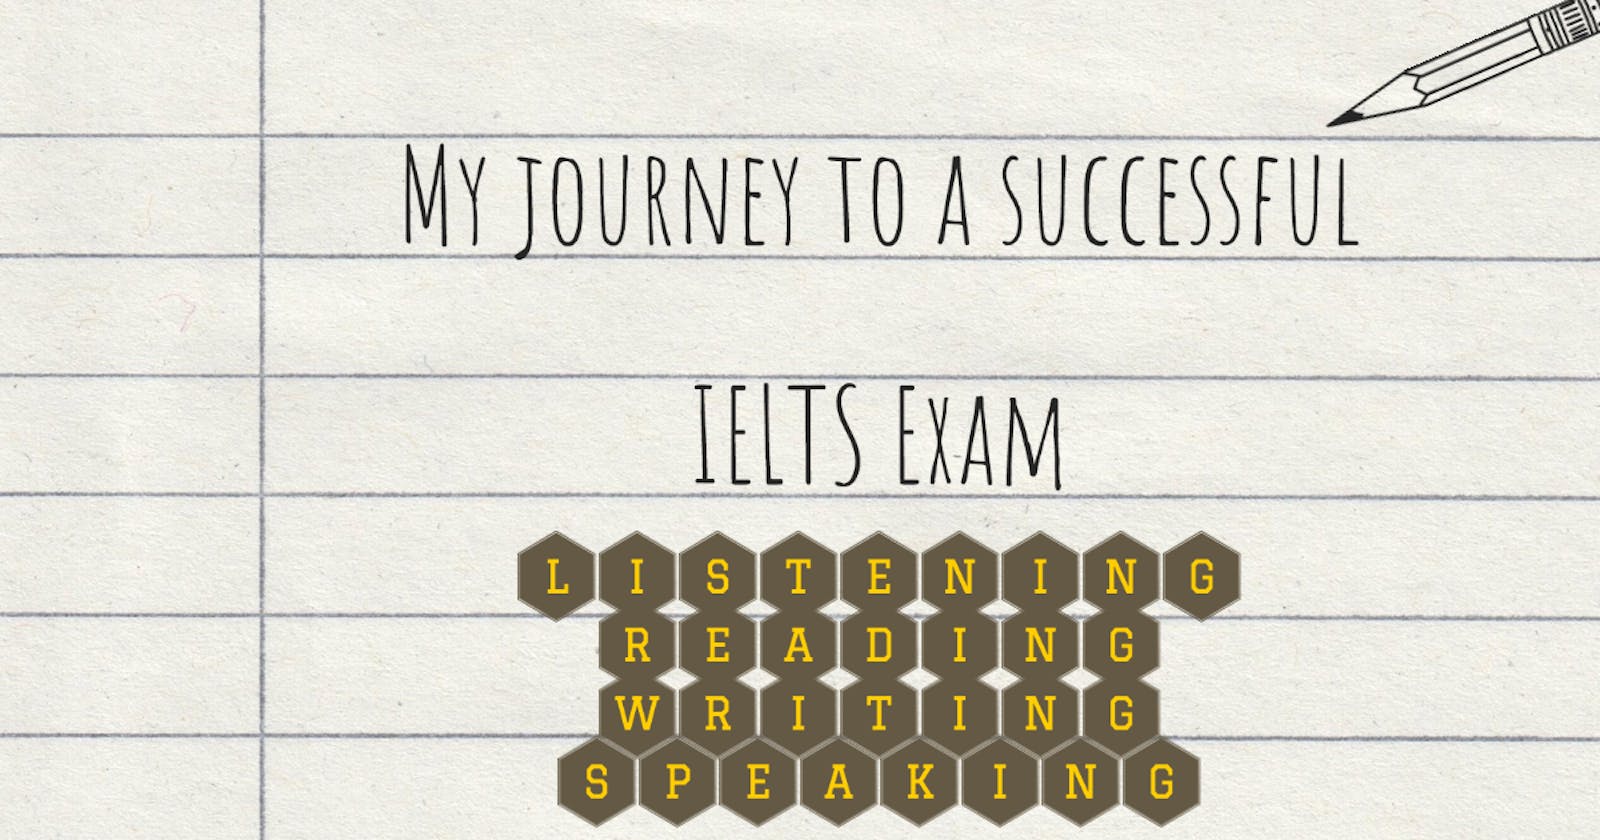 My journey to a successful IELTS Exam